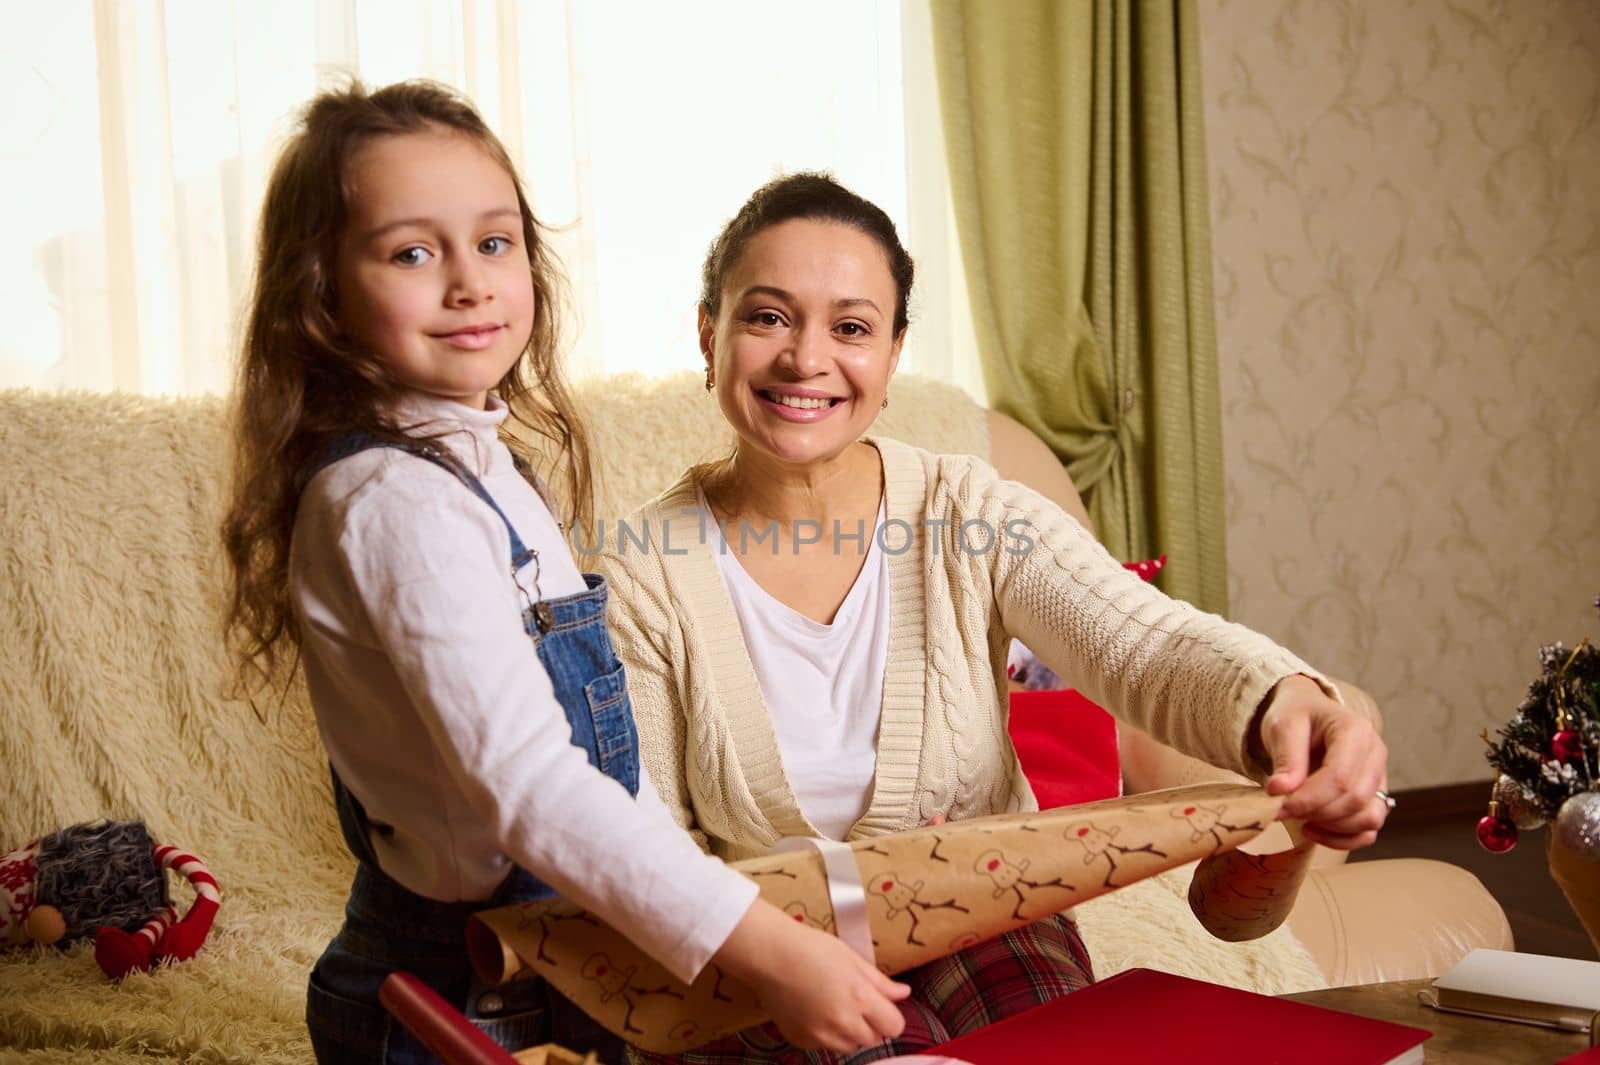 Pretty woman, loving mother and lovely daughter smile sweetly looking at the camera while wrapping gifts for Christmas, New Year or any other occasion. Looking forward to the upcoming winter holidays